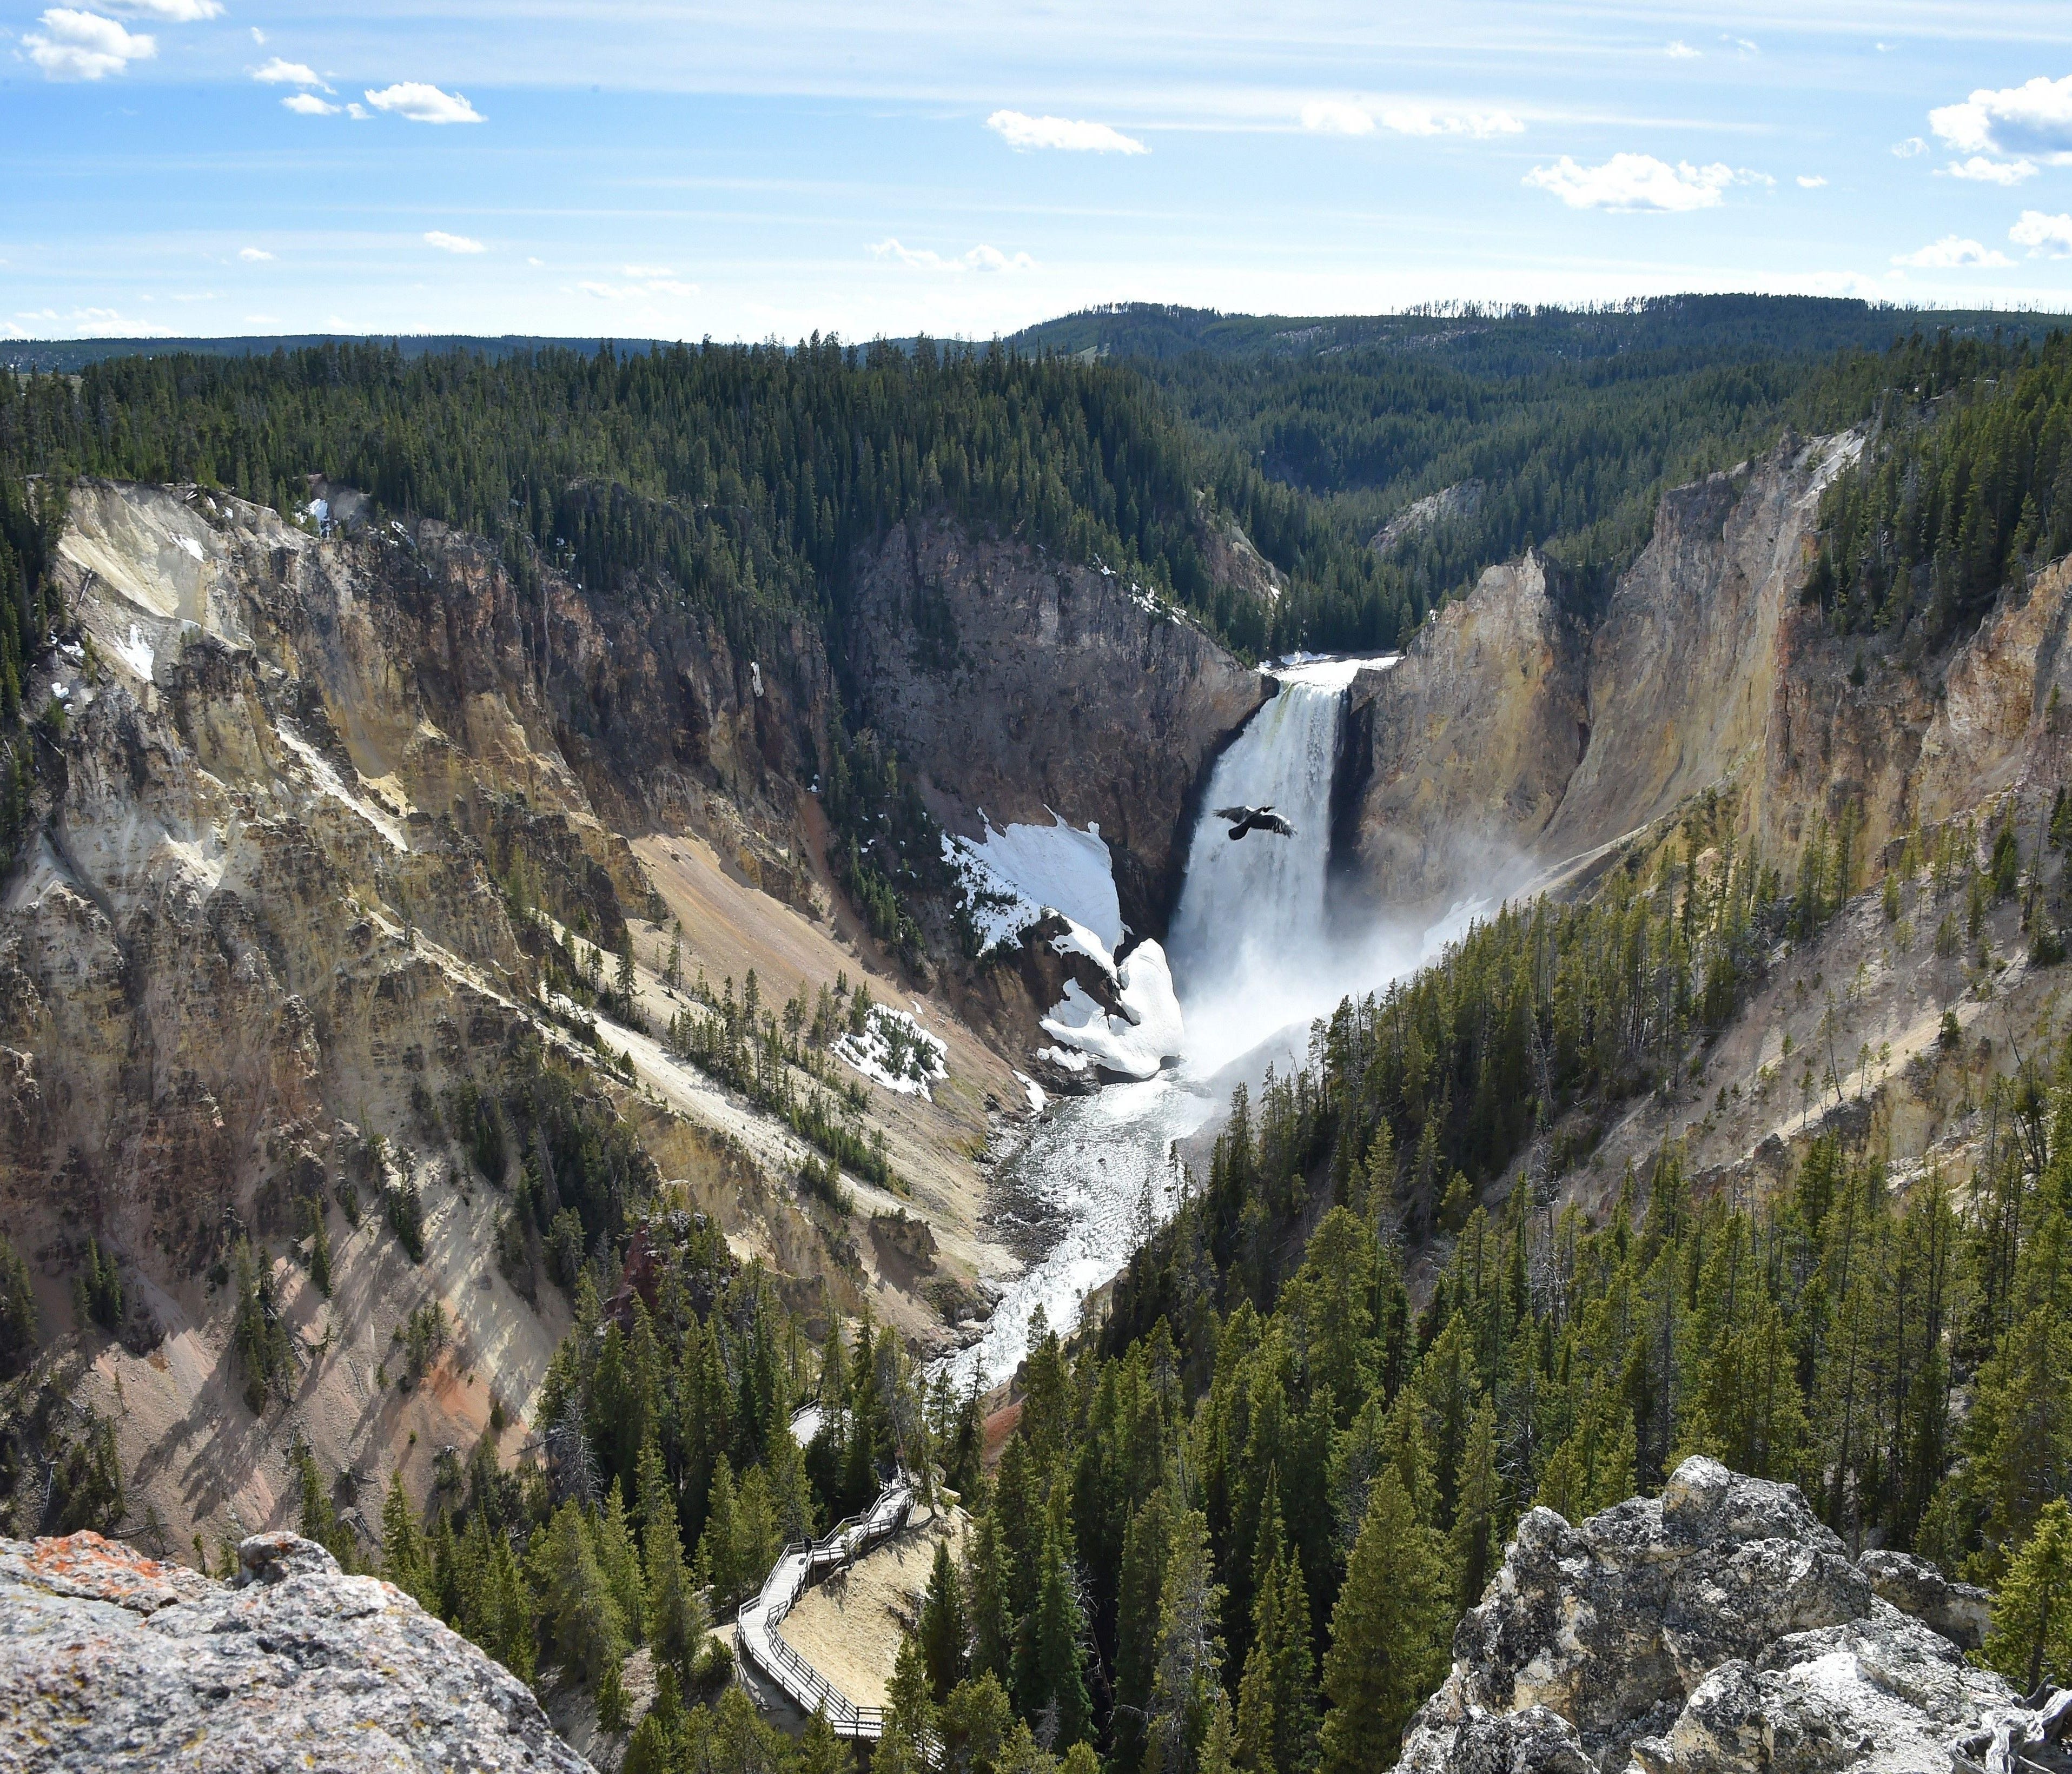 A view of the Lower Falls at the Grand Canyon of the Yellowstone National Park on May 11, 2016. Yellowstone, the first National Park in the US and widely held to be the first national park in the world, is known for its wildlife and its many geotherm